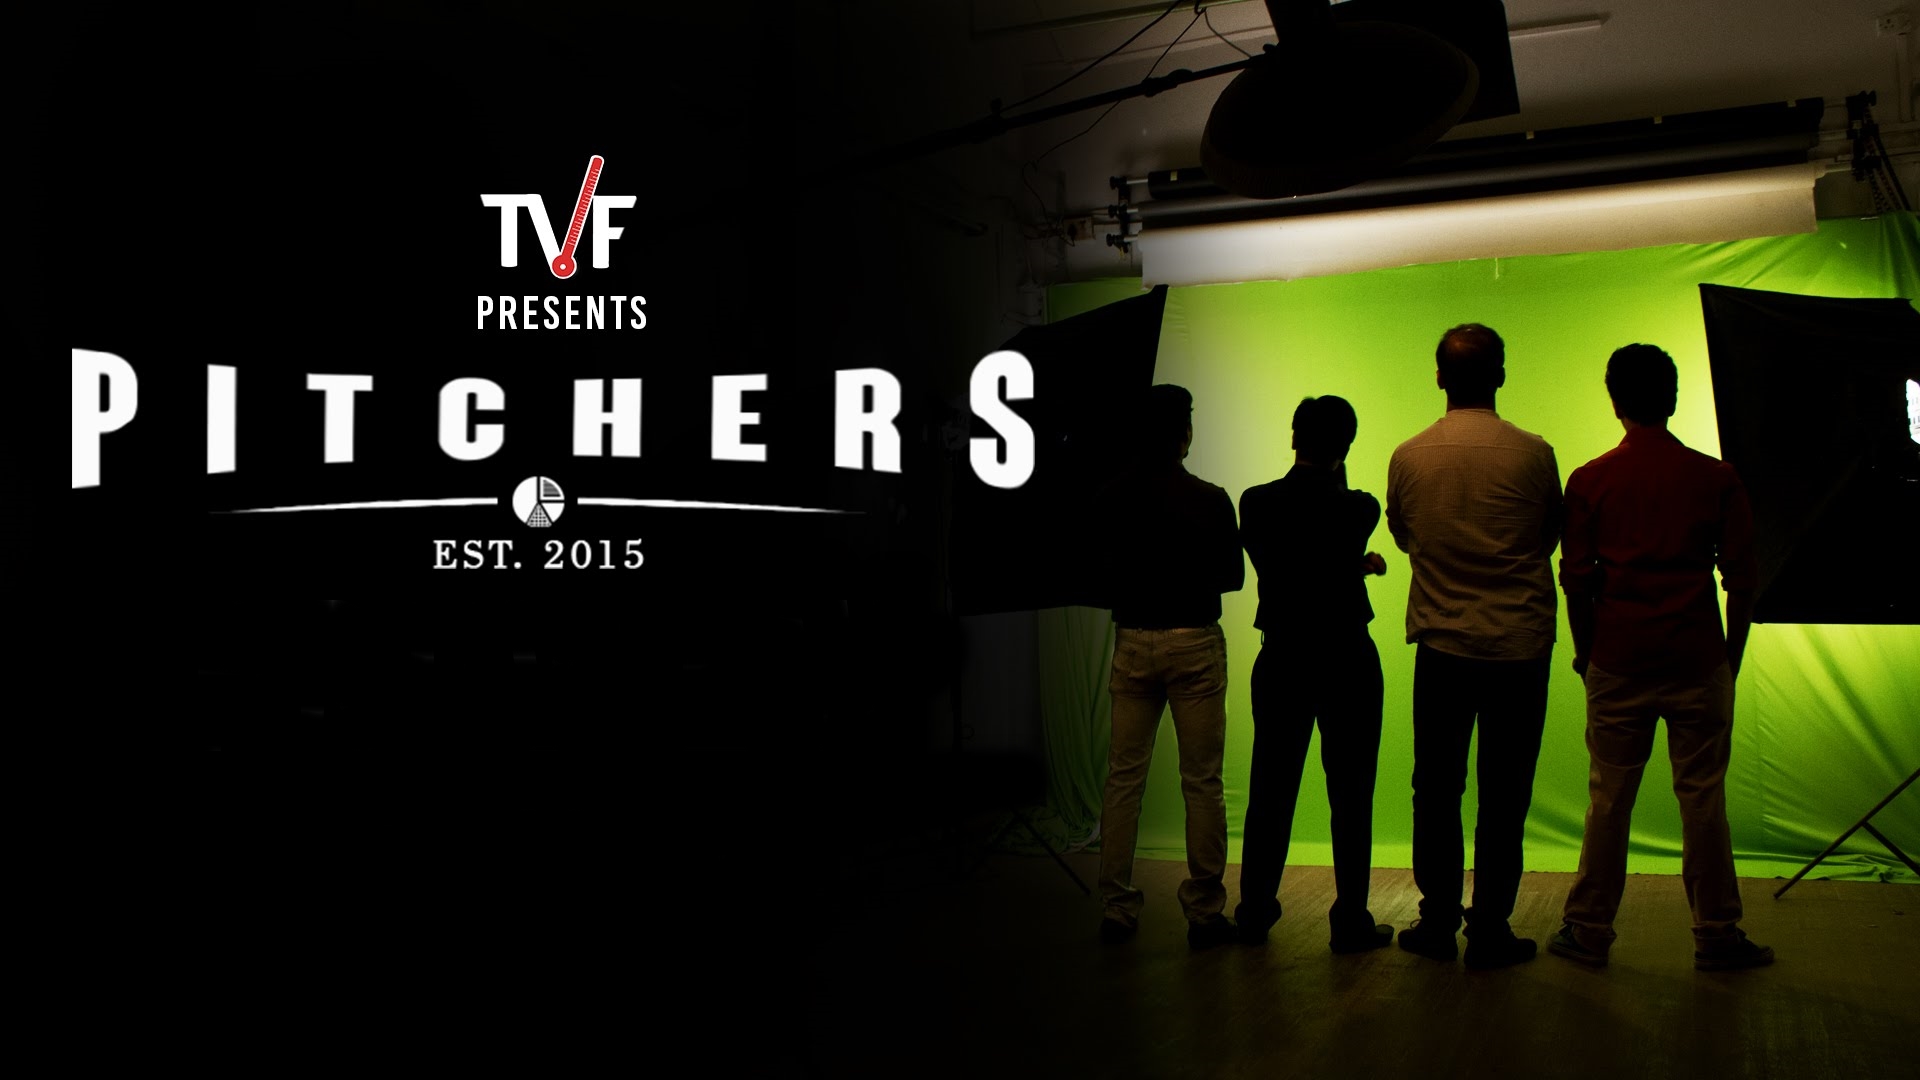 tvf pitchers web series only indian show to get ranked at 92 place of all top 250 tv shows of all time 